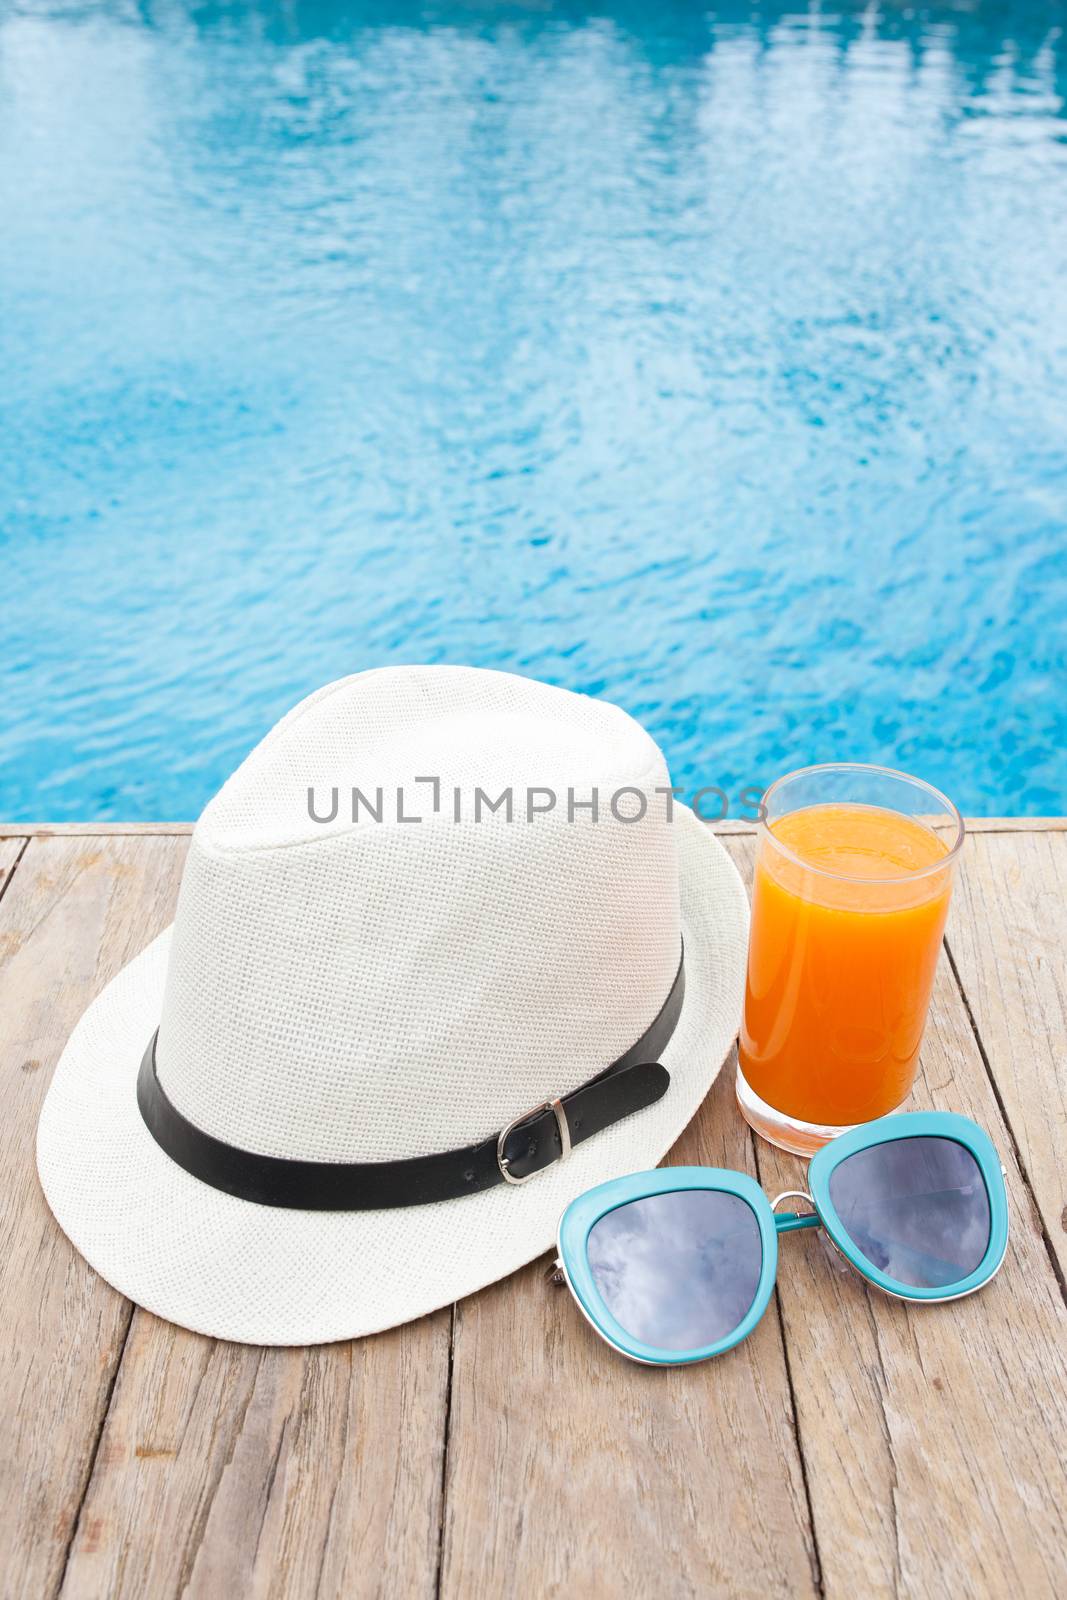 Summertime orange juice hat and sunglasses relax near swimming p by nopparats